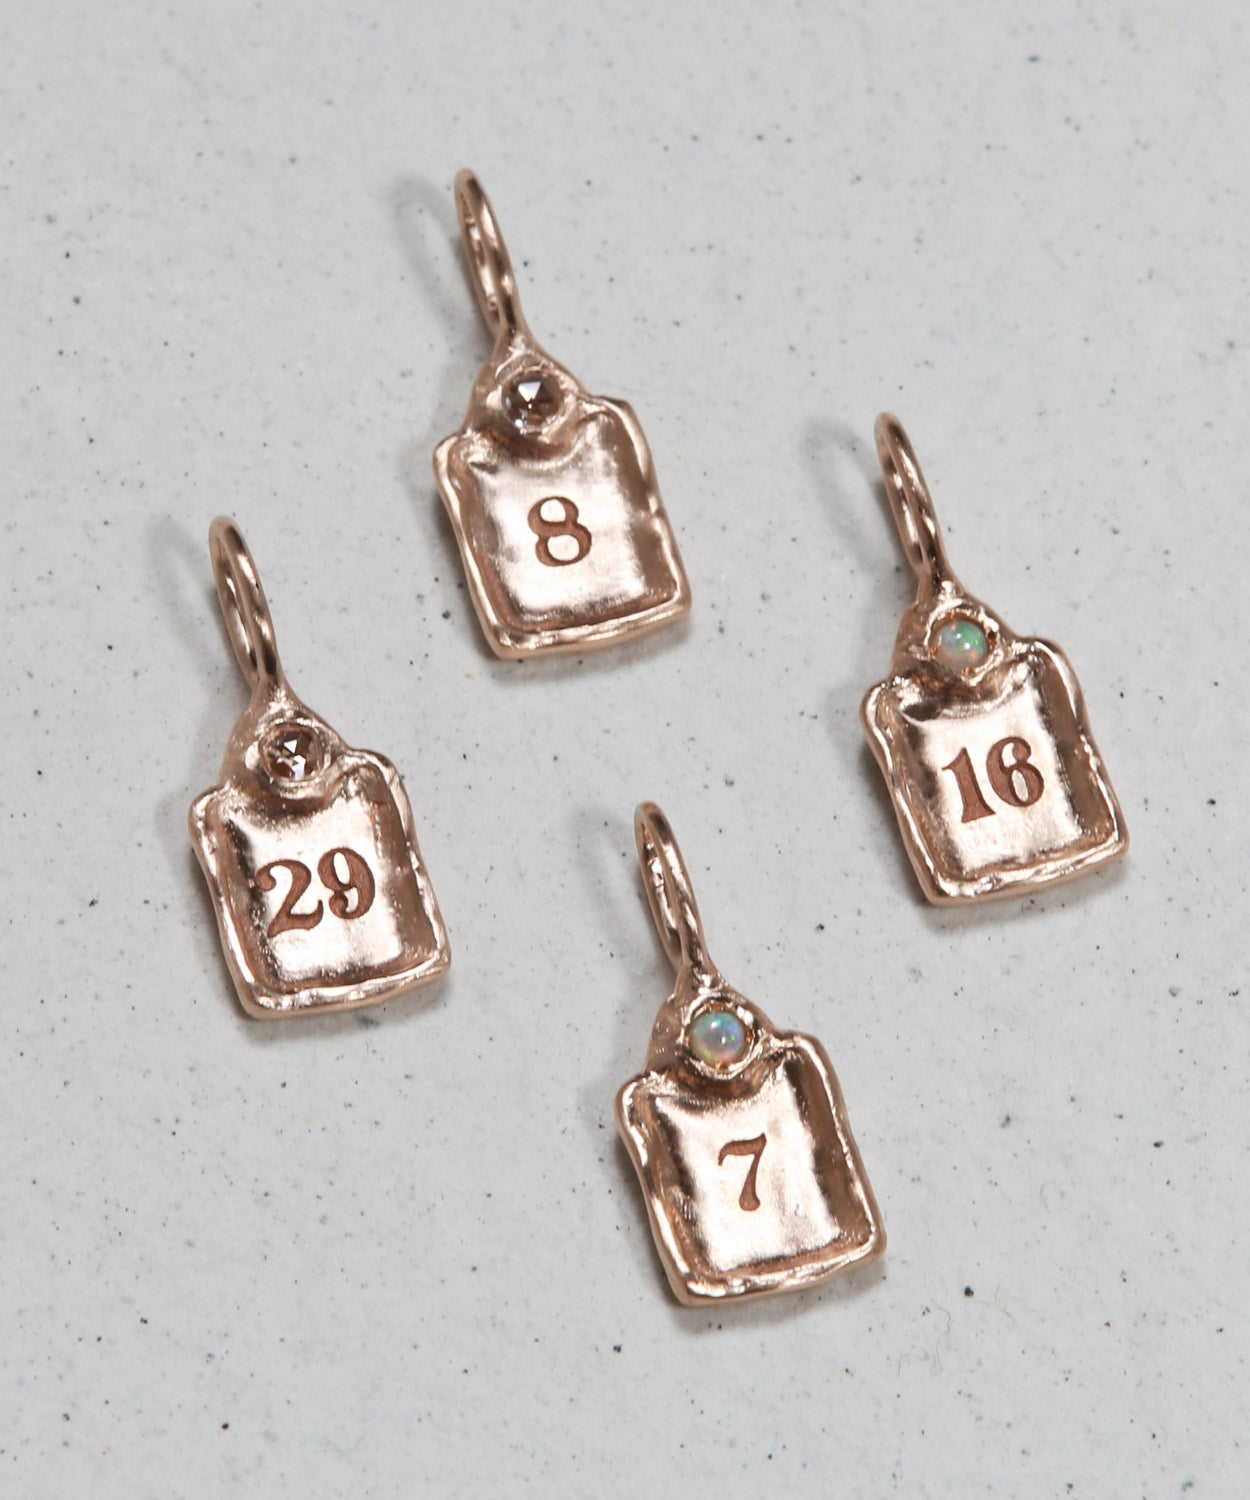 Number Charms Necklaces, Number Charms Jewelry